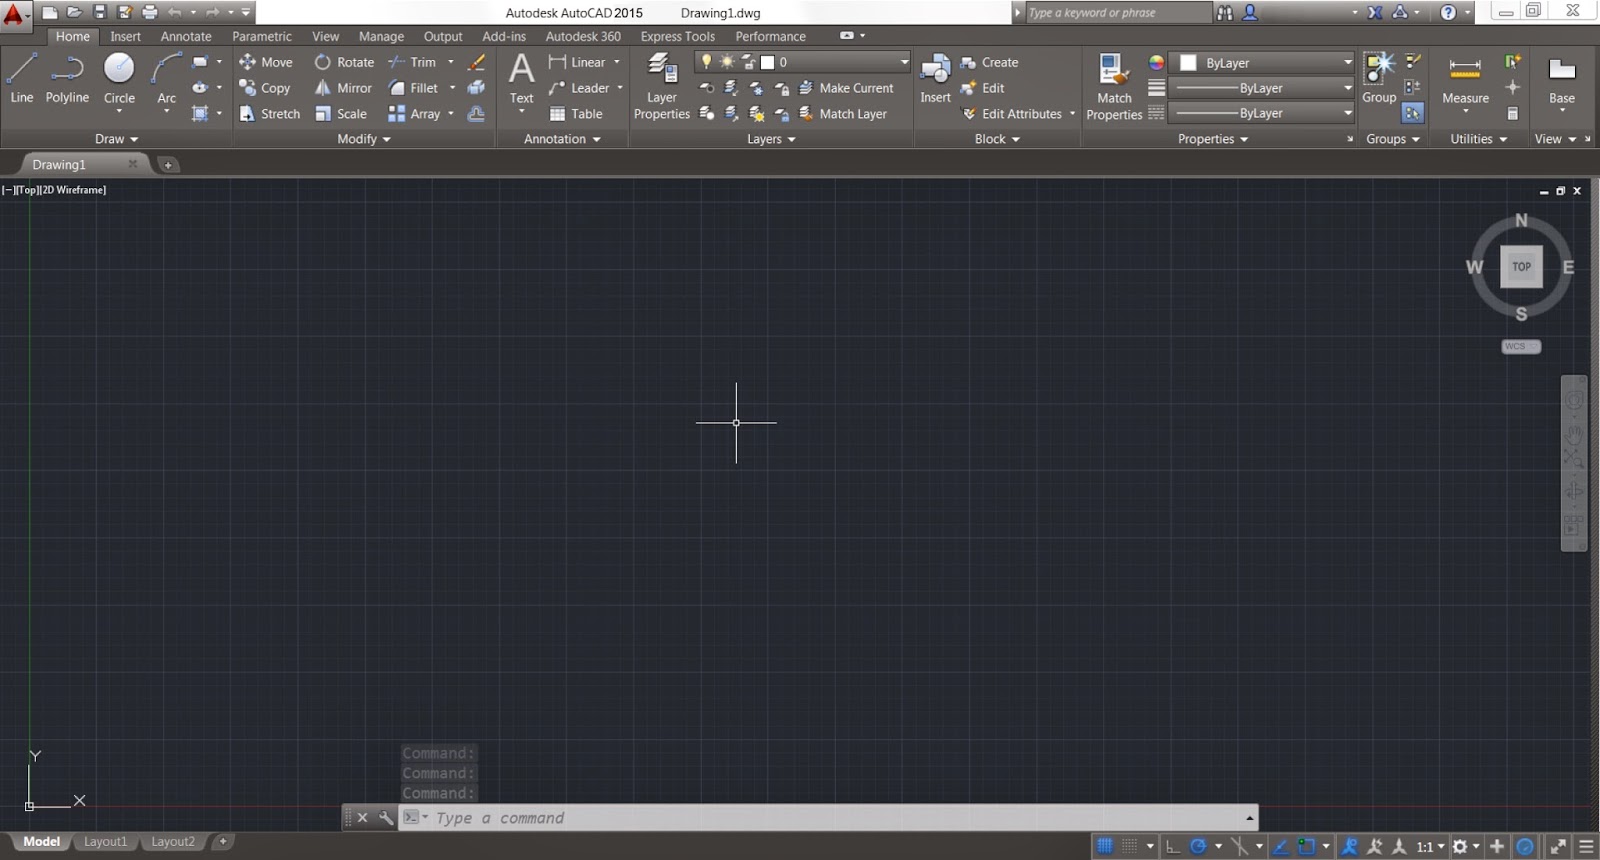 autocad 2015 free download full version with crack 64 bit